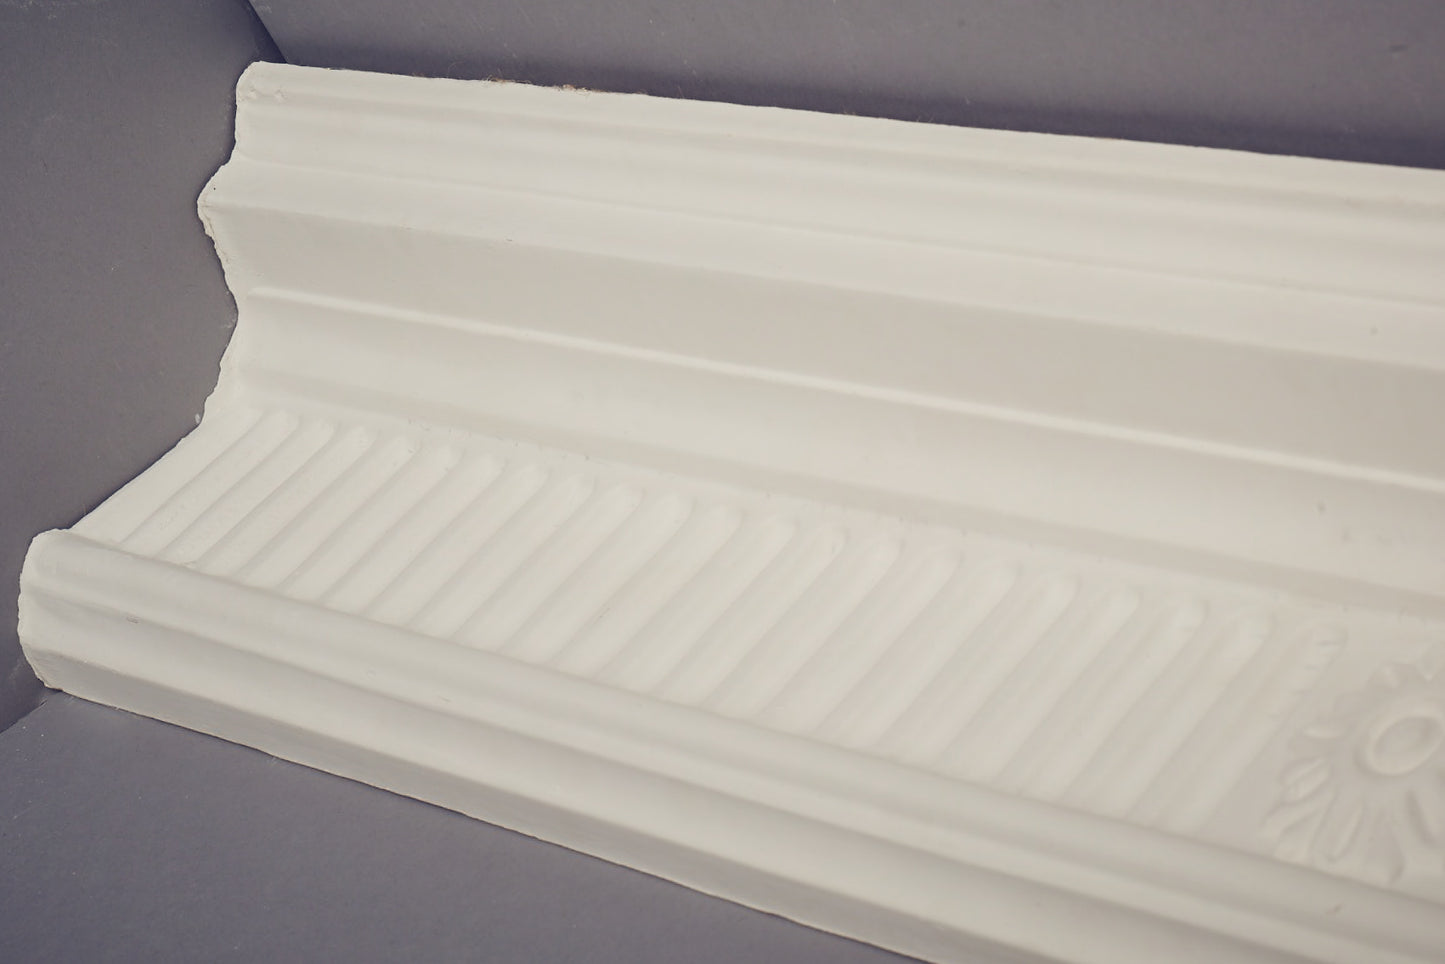 rib and floral coving c1 cornice